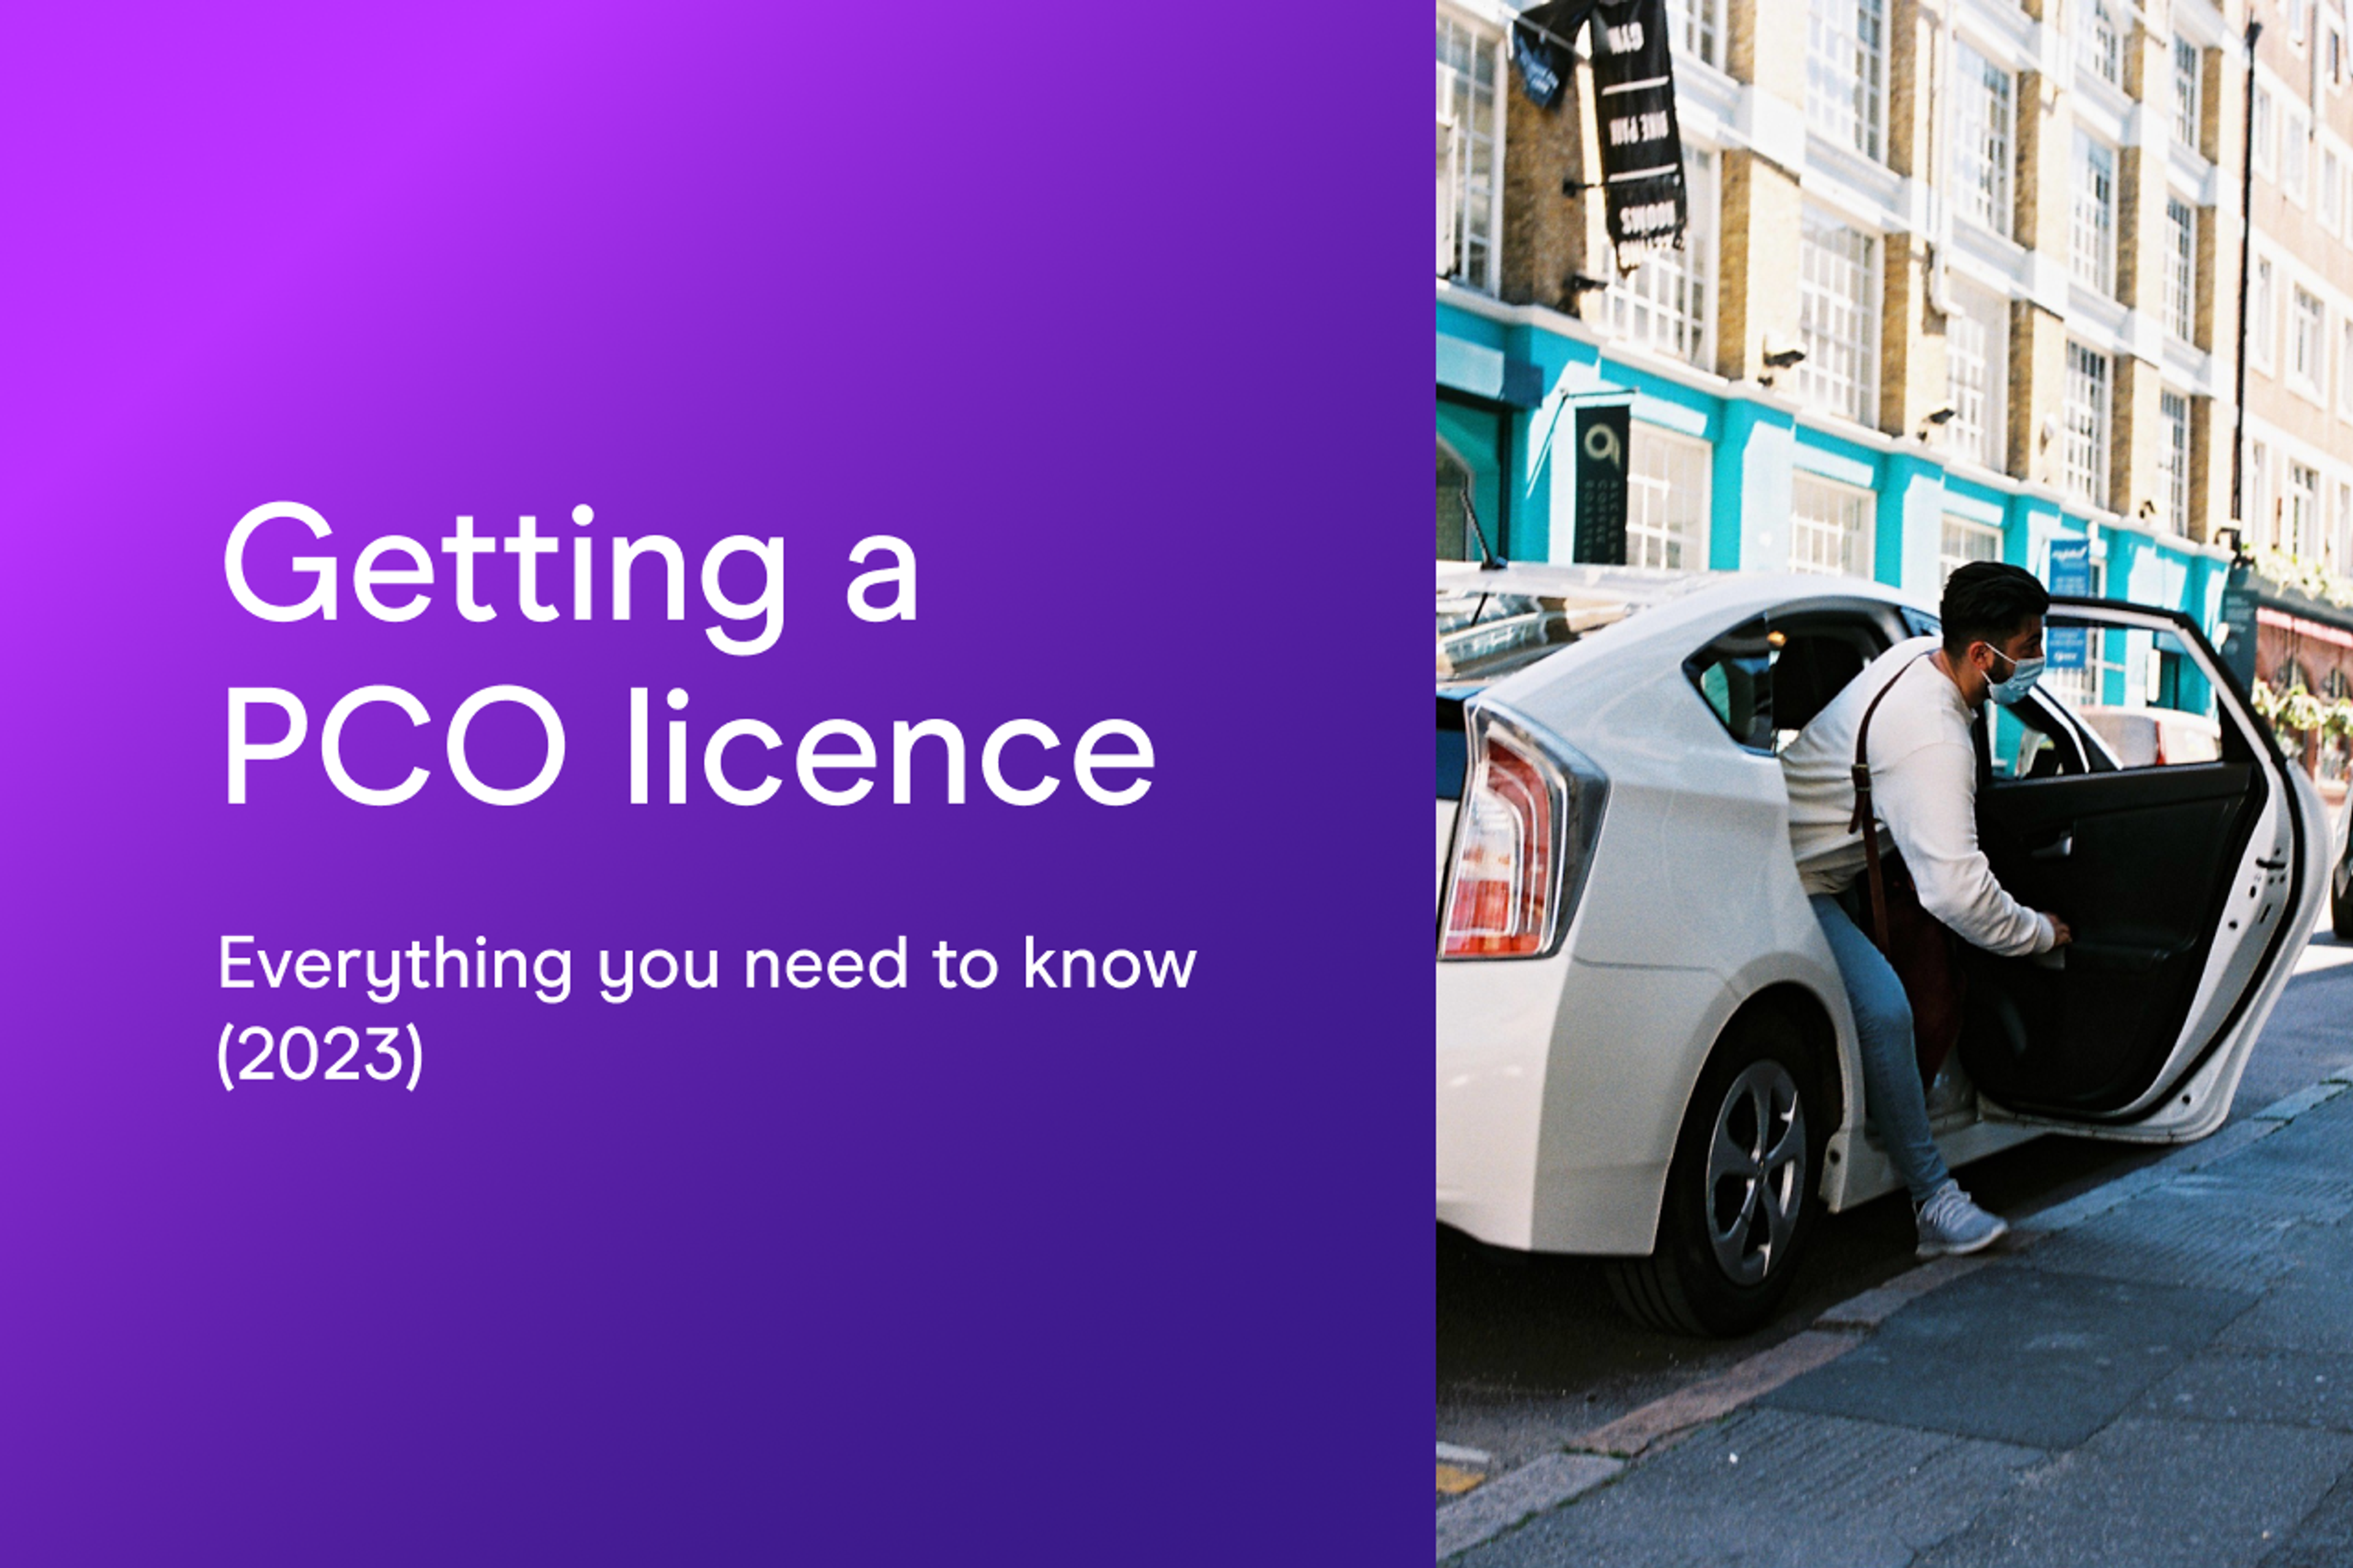 passenger getting into private hire car PCO licence featured image